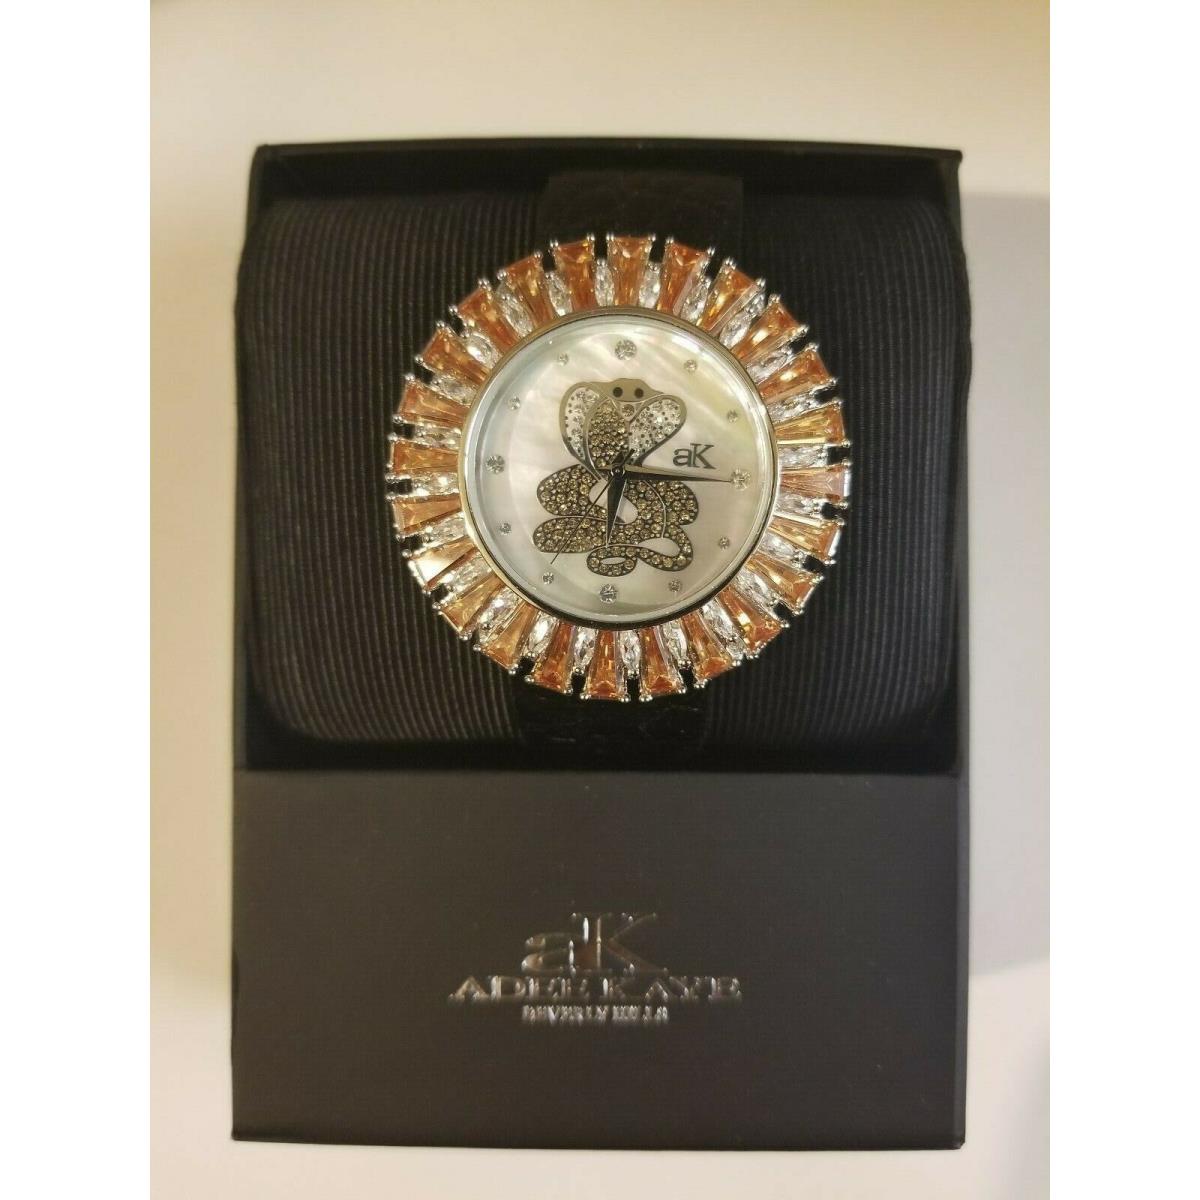 Cobra in Mother of Pearl Dial Watch by Adee Kaye with Yellow Austrian Crystals